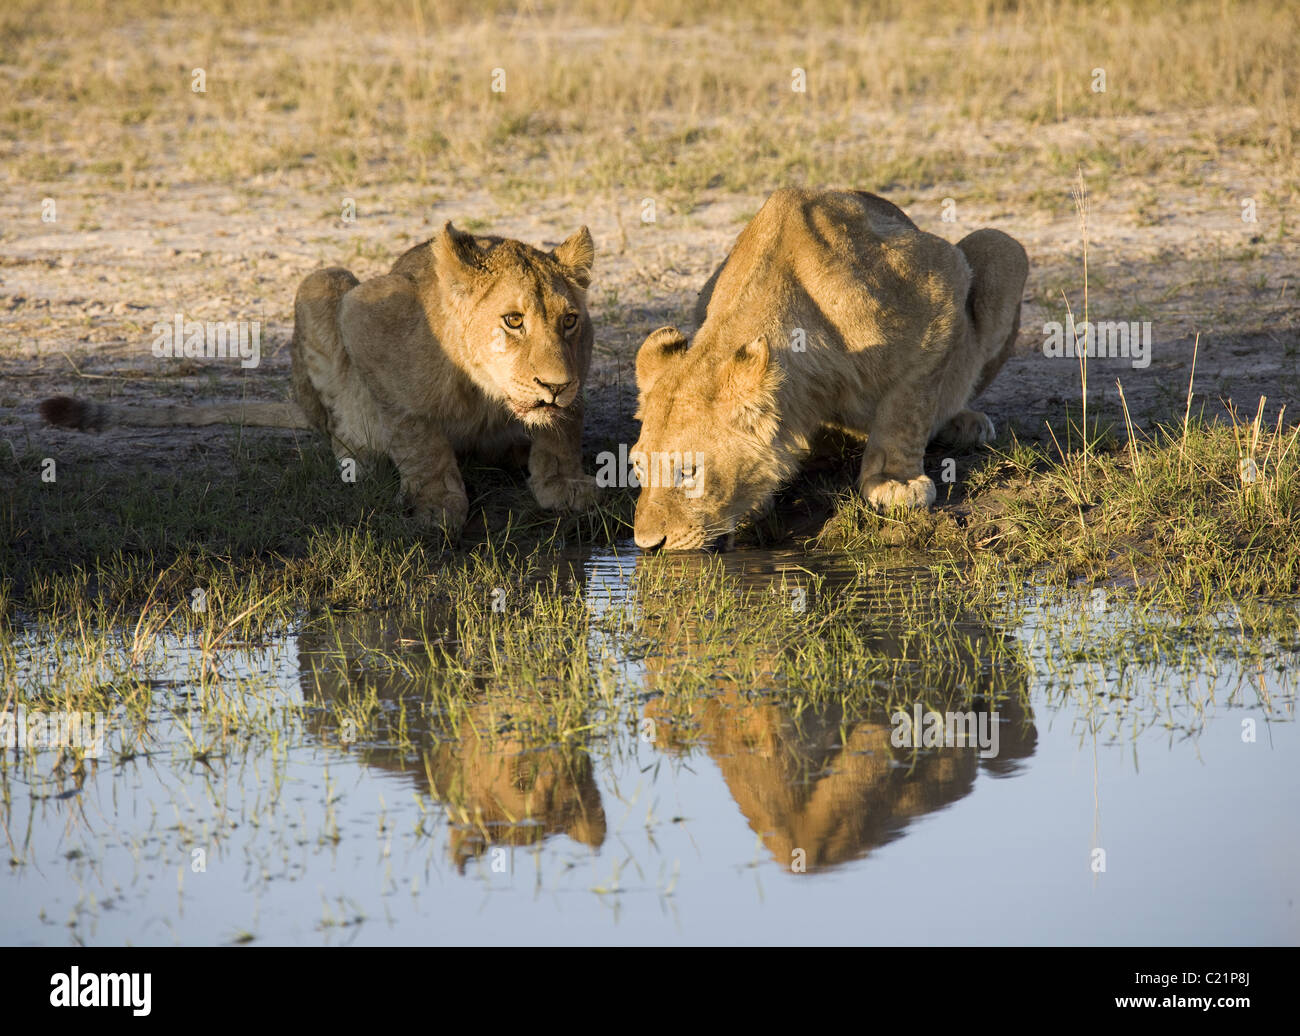 Lion at a watering hole Stock Photo